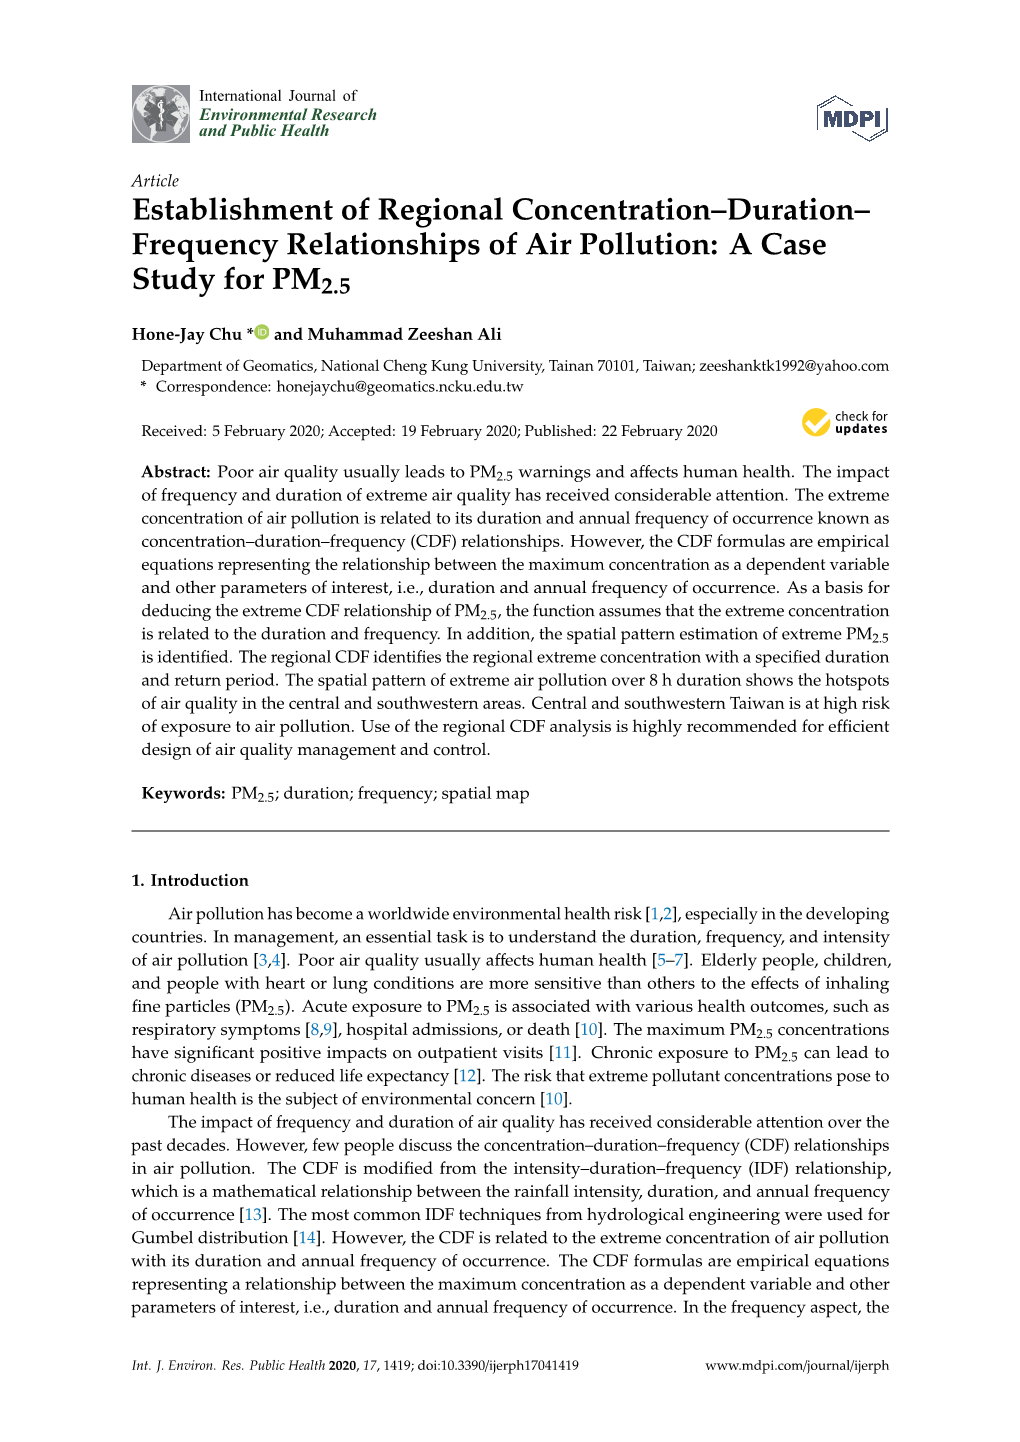 Frequency Relationships of Air Pollution: a Case Study for PM2.5